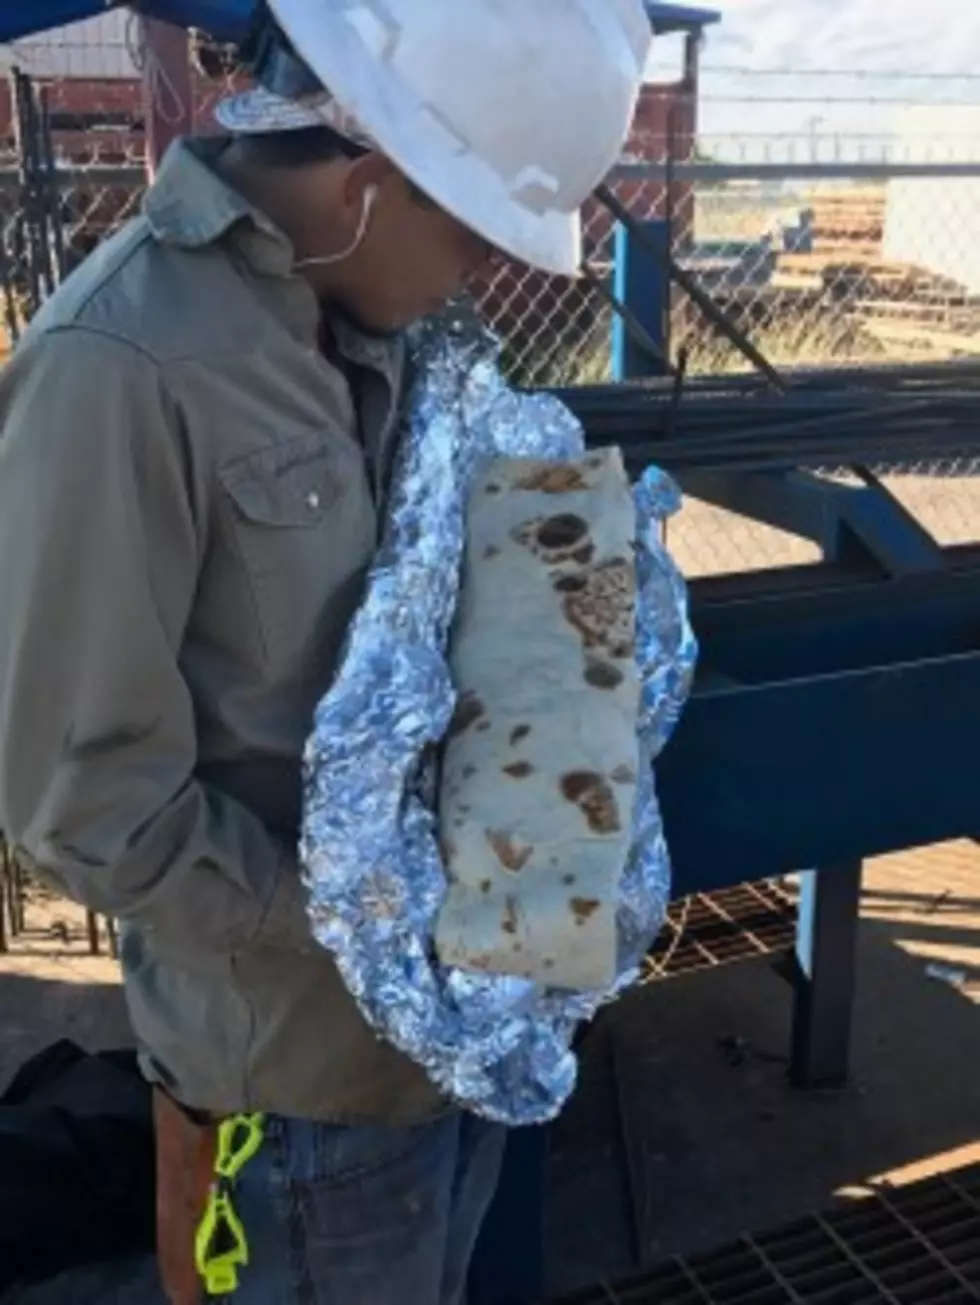 A Texas Taco is Longer Than Your Forearm and Weighs 5 Pounds